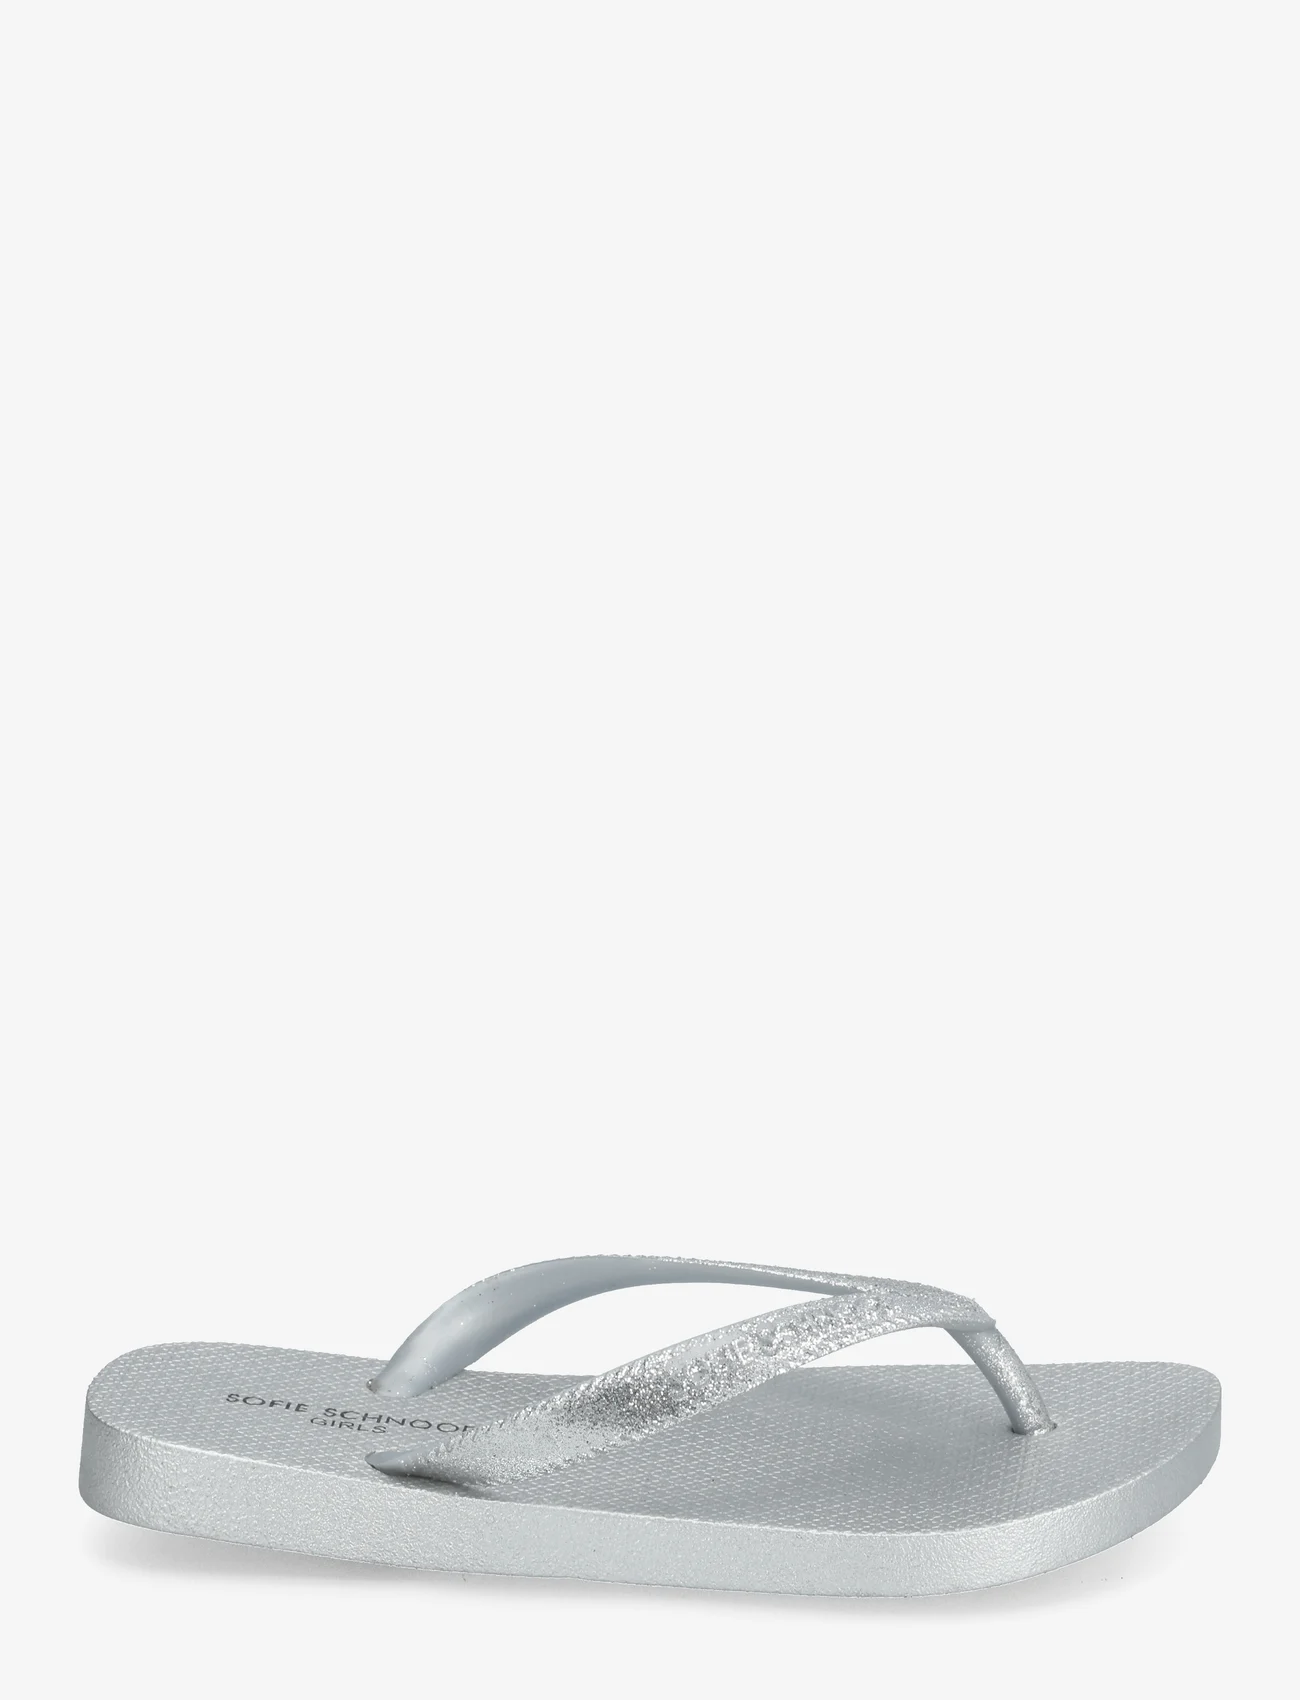 Sofie Schnoor Baby and Kids - Sandal - zomerkoopjes - silver - 1